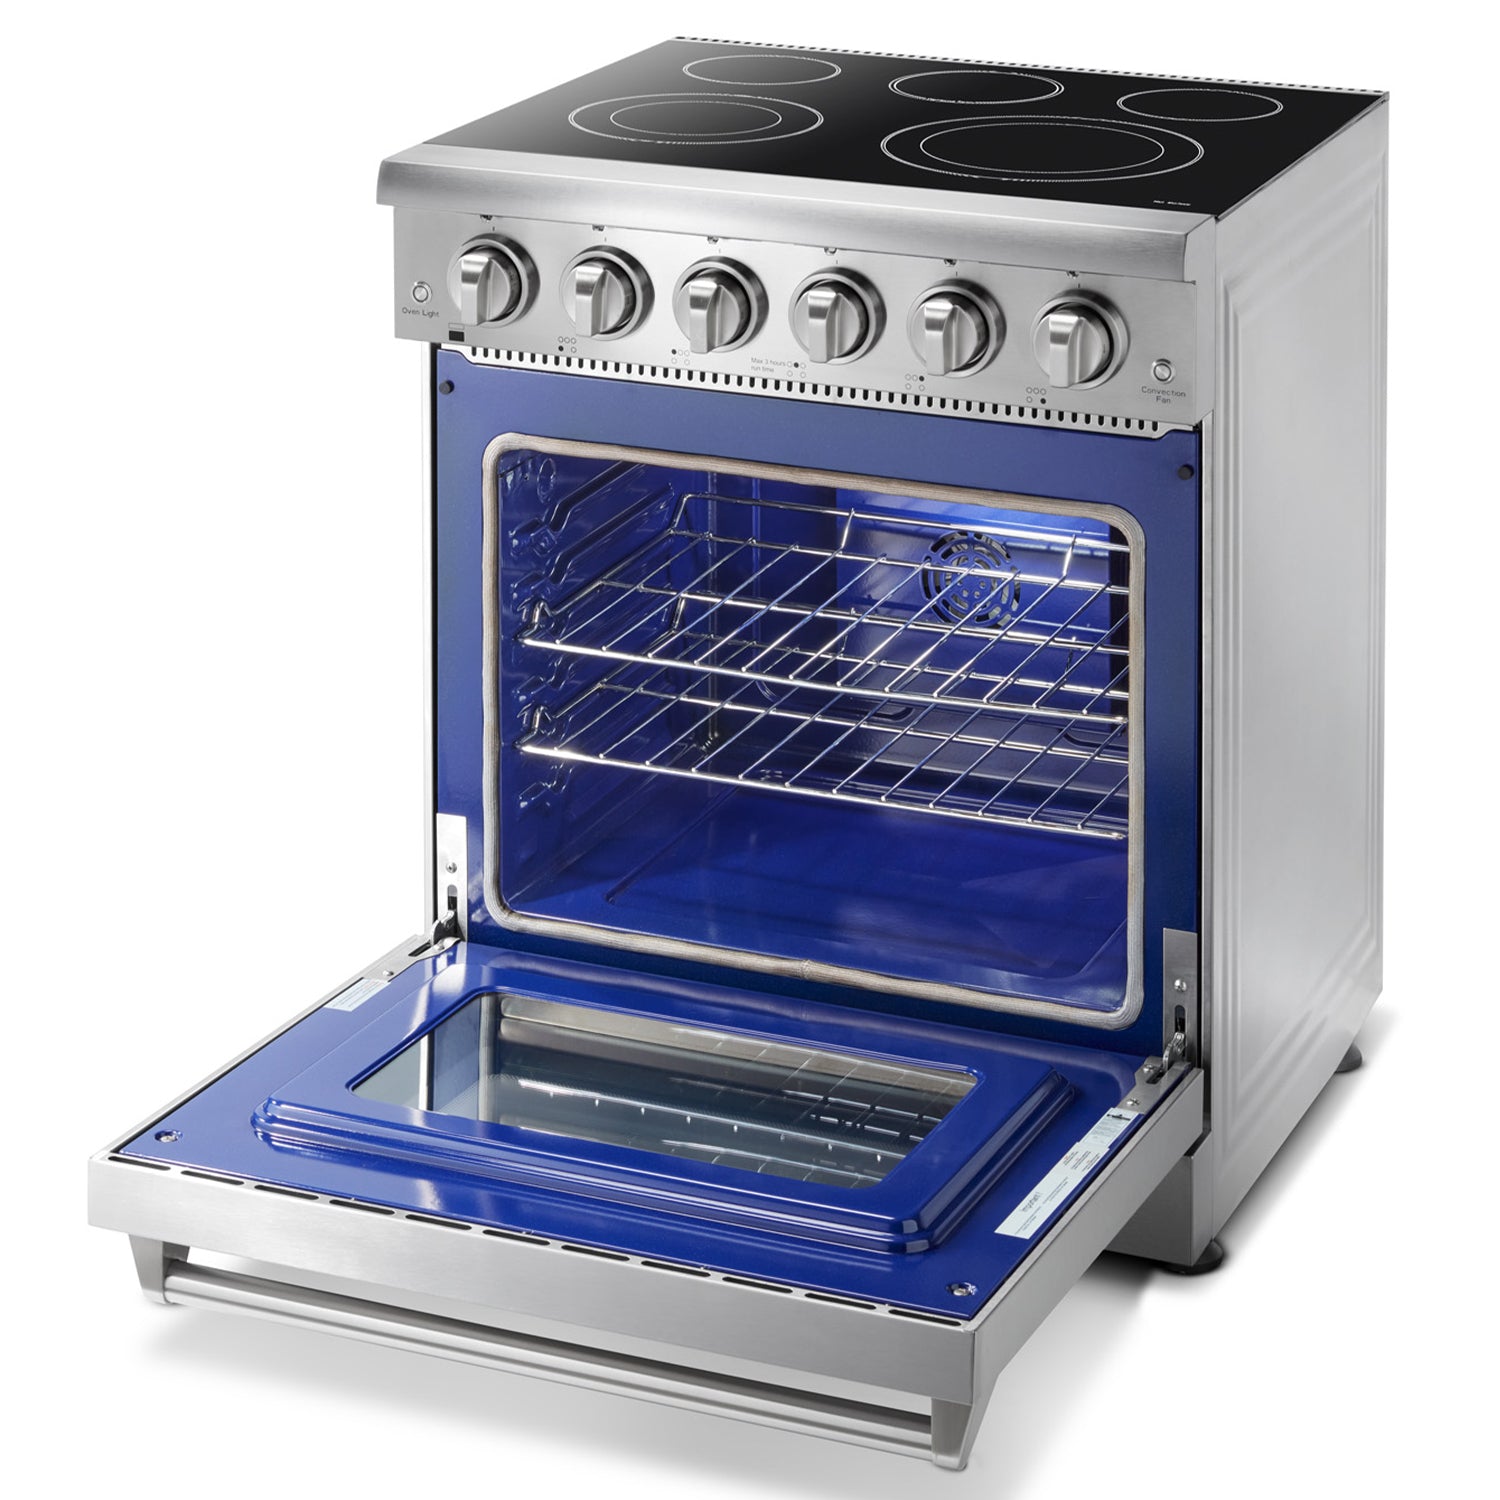 Thor Kitchen 30 Inch Professional Electric Range - HRE3001